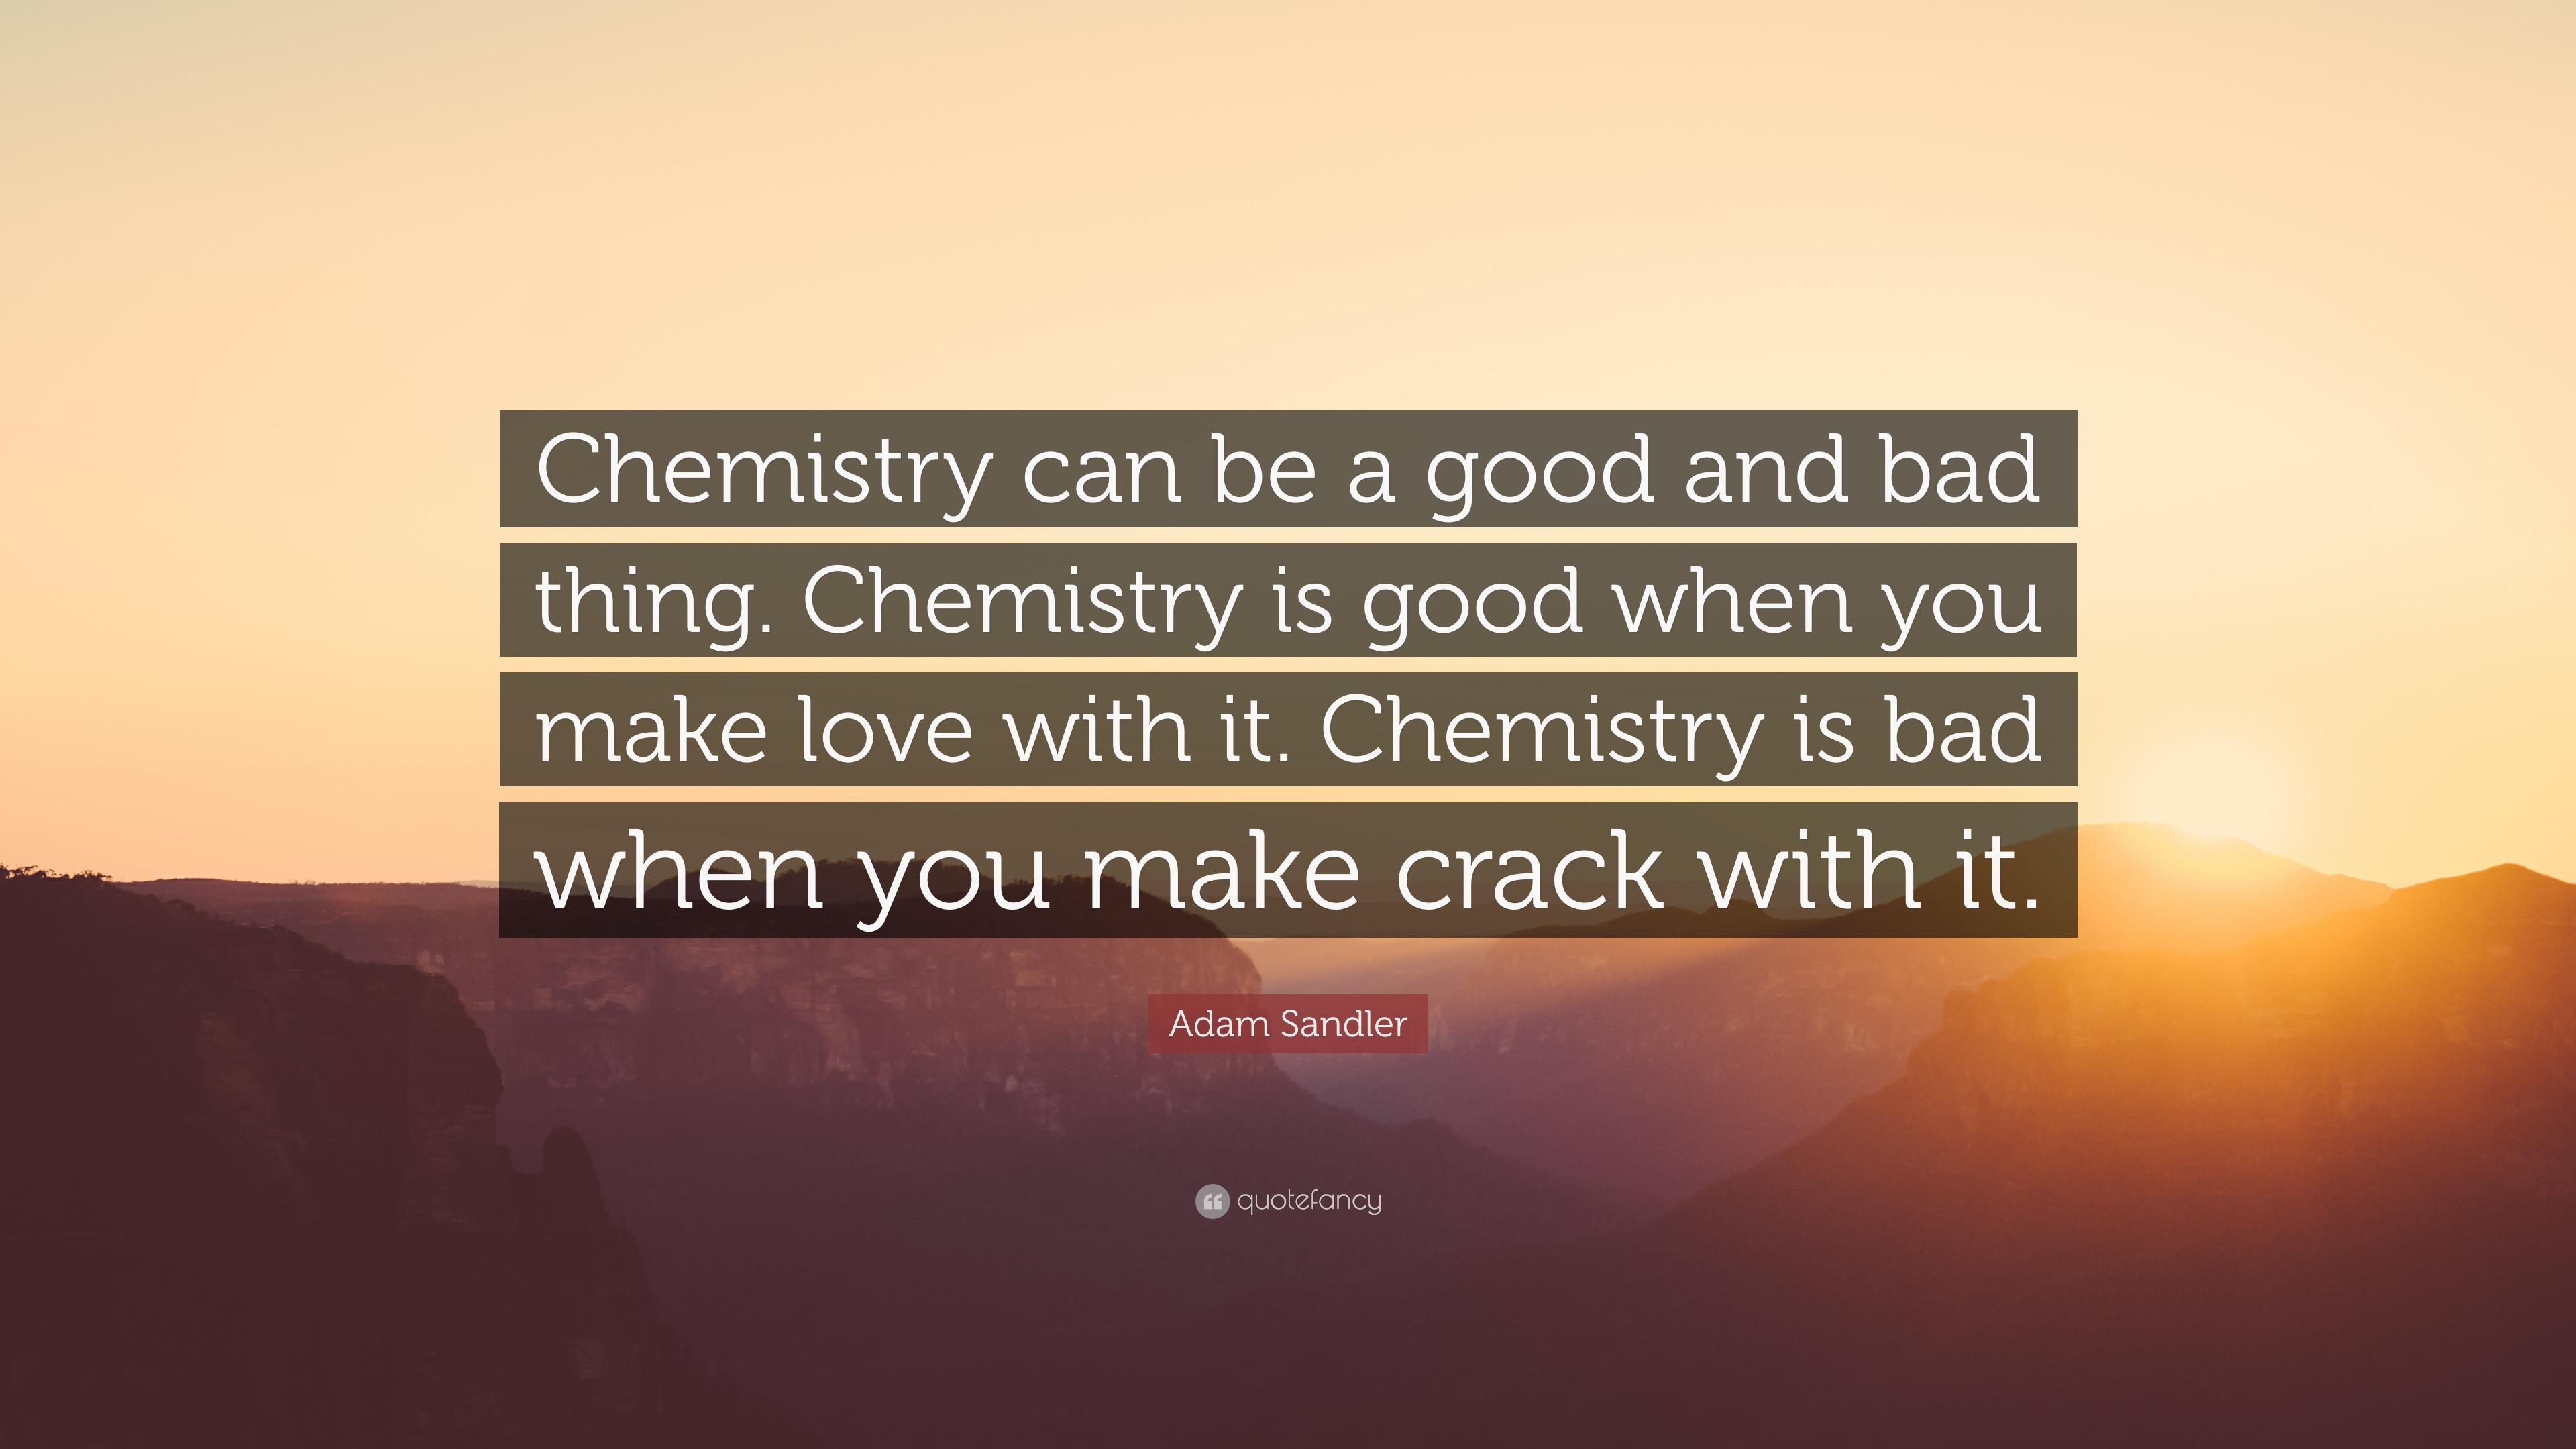 Adam Sandler Quote “Chemistry can be a good and bad thing Chemistry is